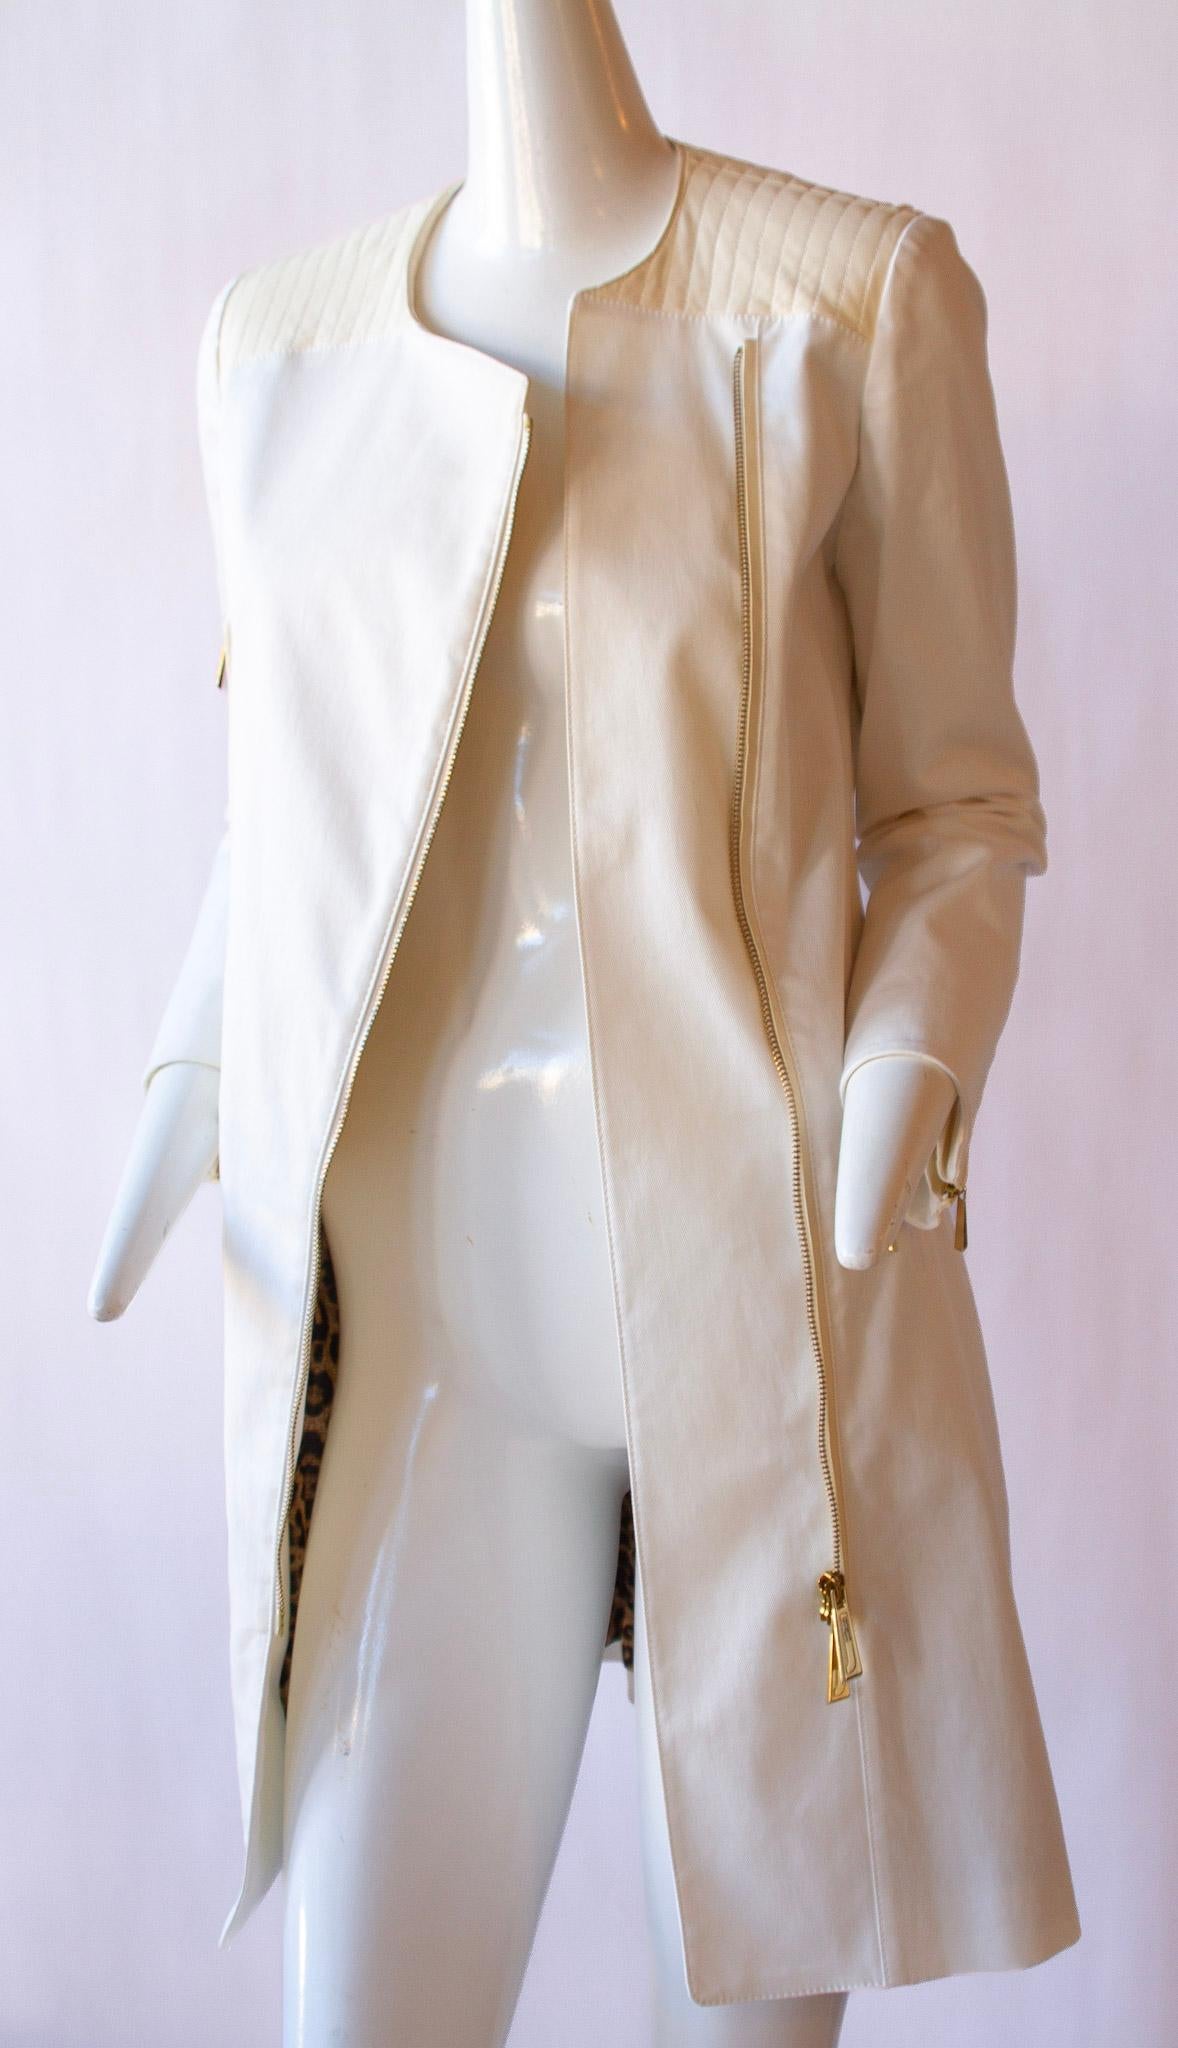 Just Cavalli full-length white zipper coat with leopard lining